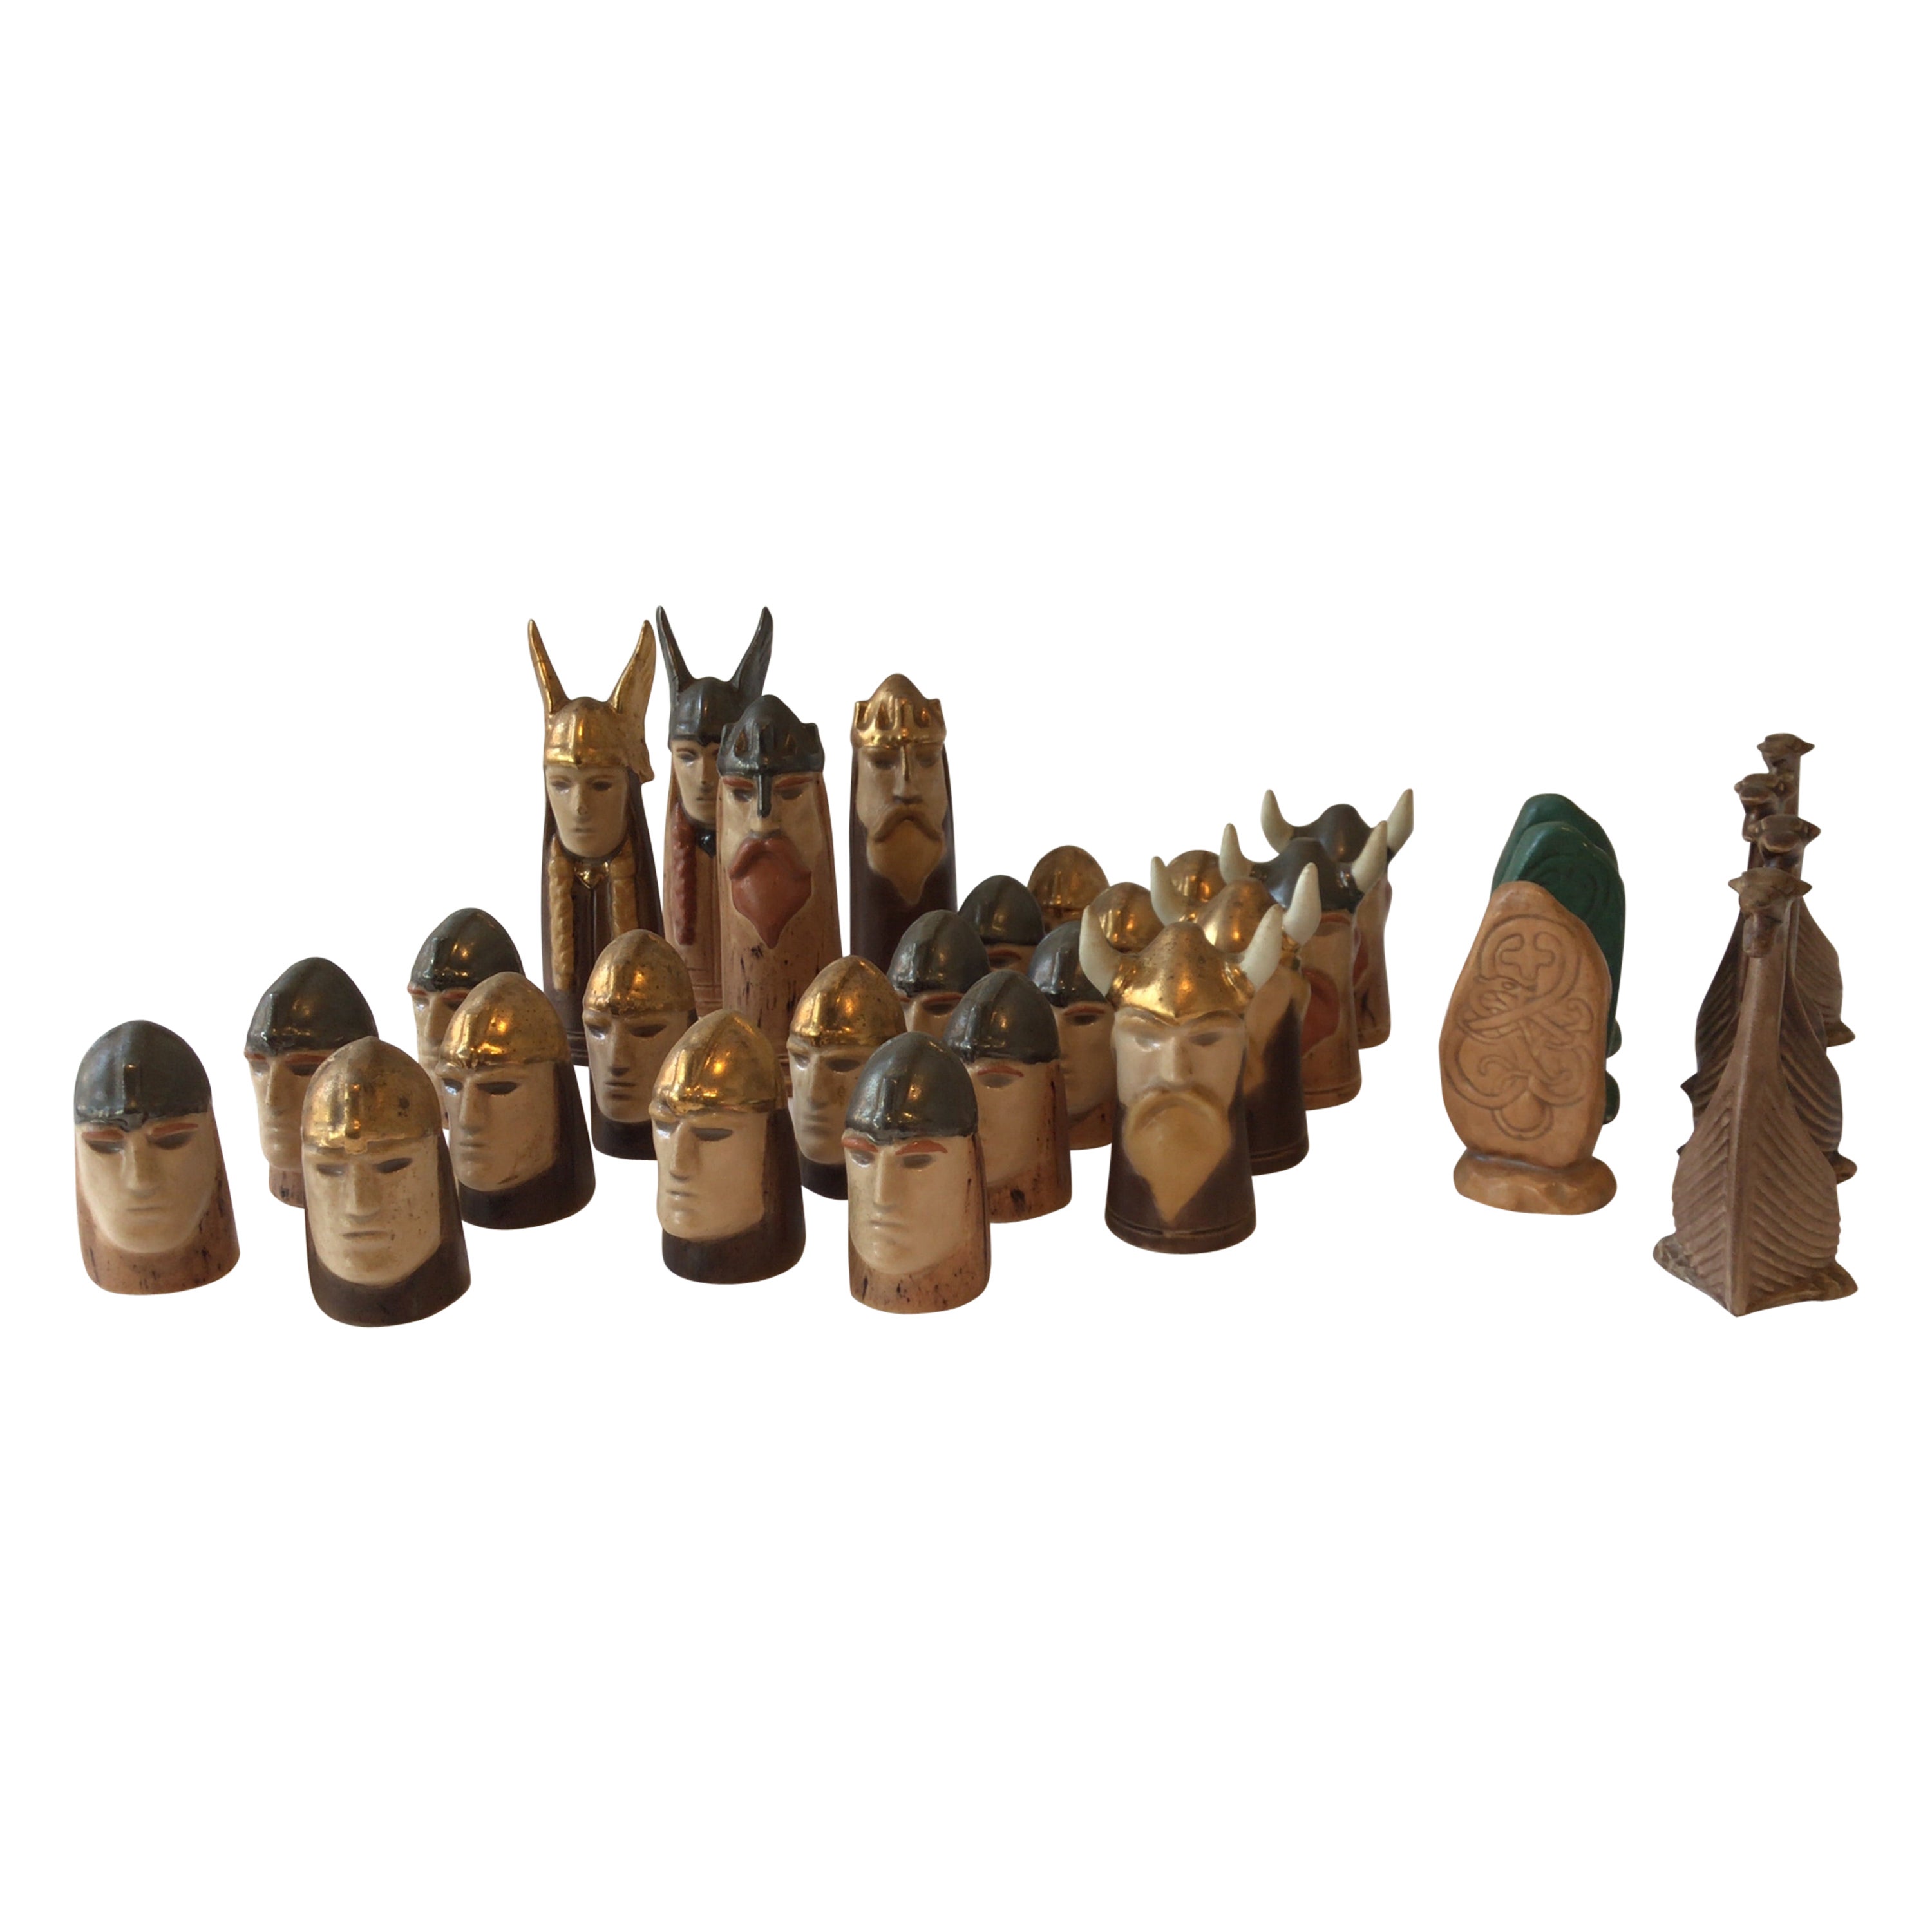 1950s Ceramic Viking Chess Pieces 'One Piece Missing'